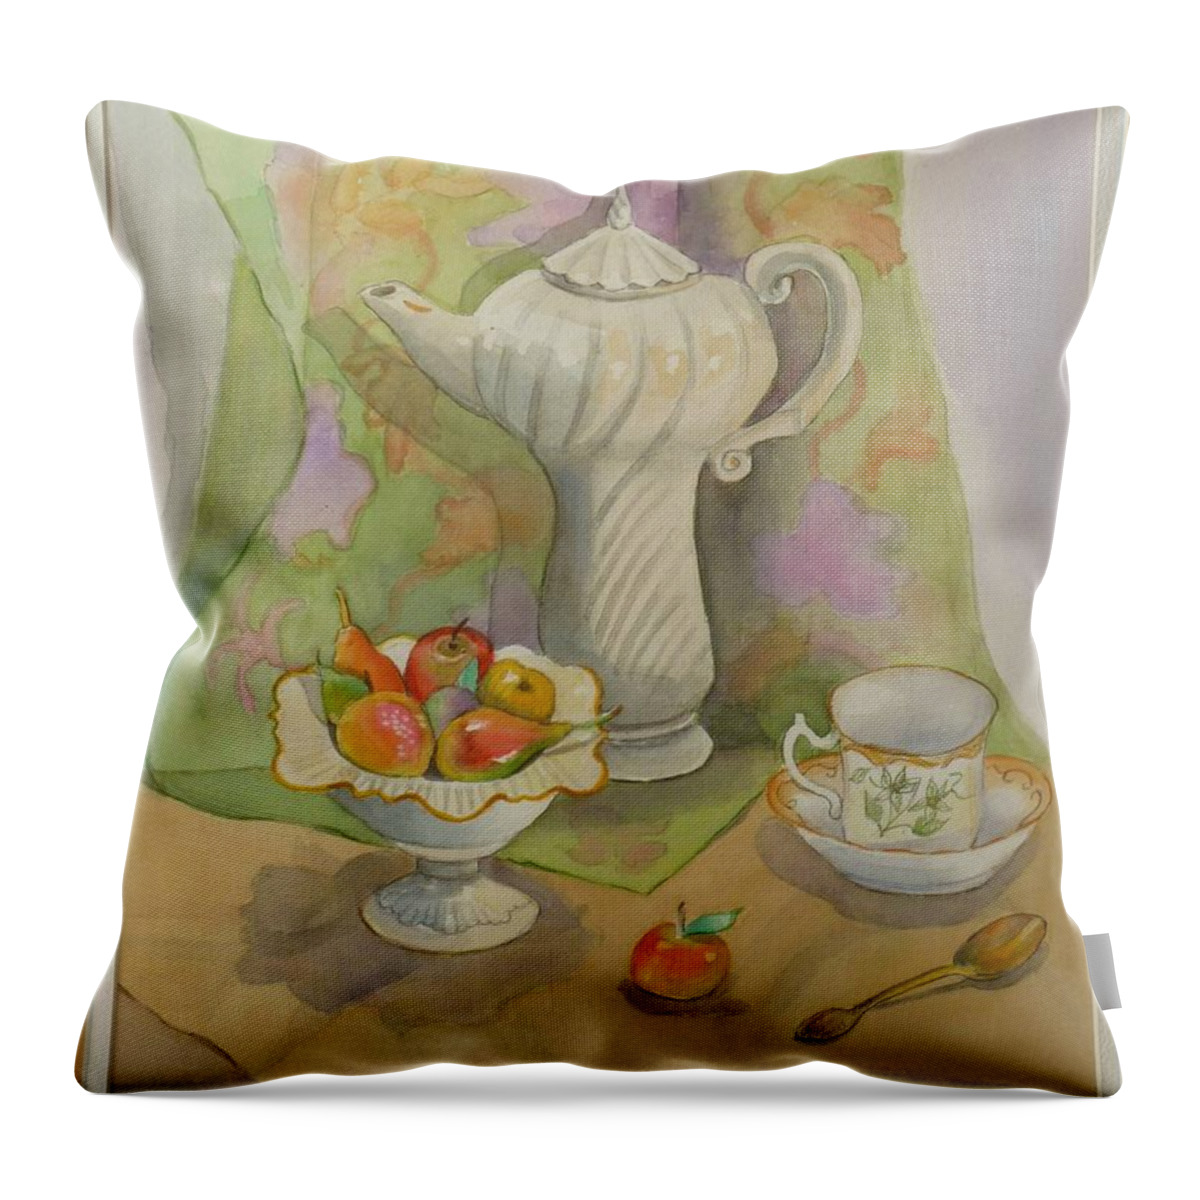 White Turkish Teapot. Marzipan Fruit Candies Throw Pillow featuring the painting Turkish Teapot With Martizpan by Madeline Lovallo